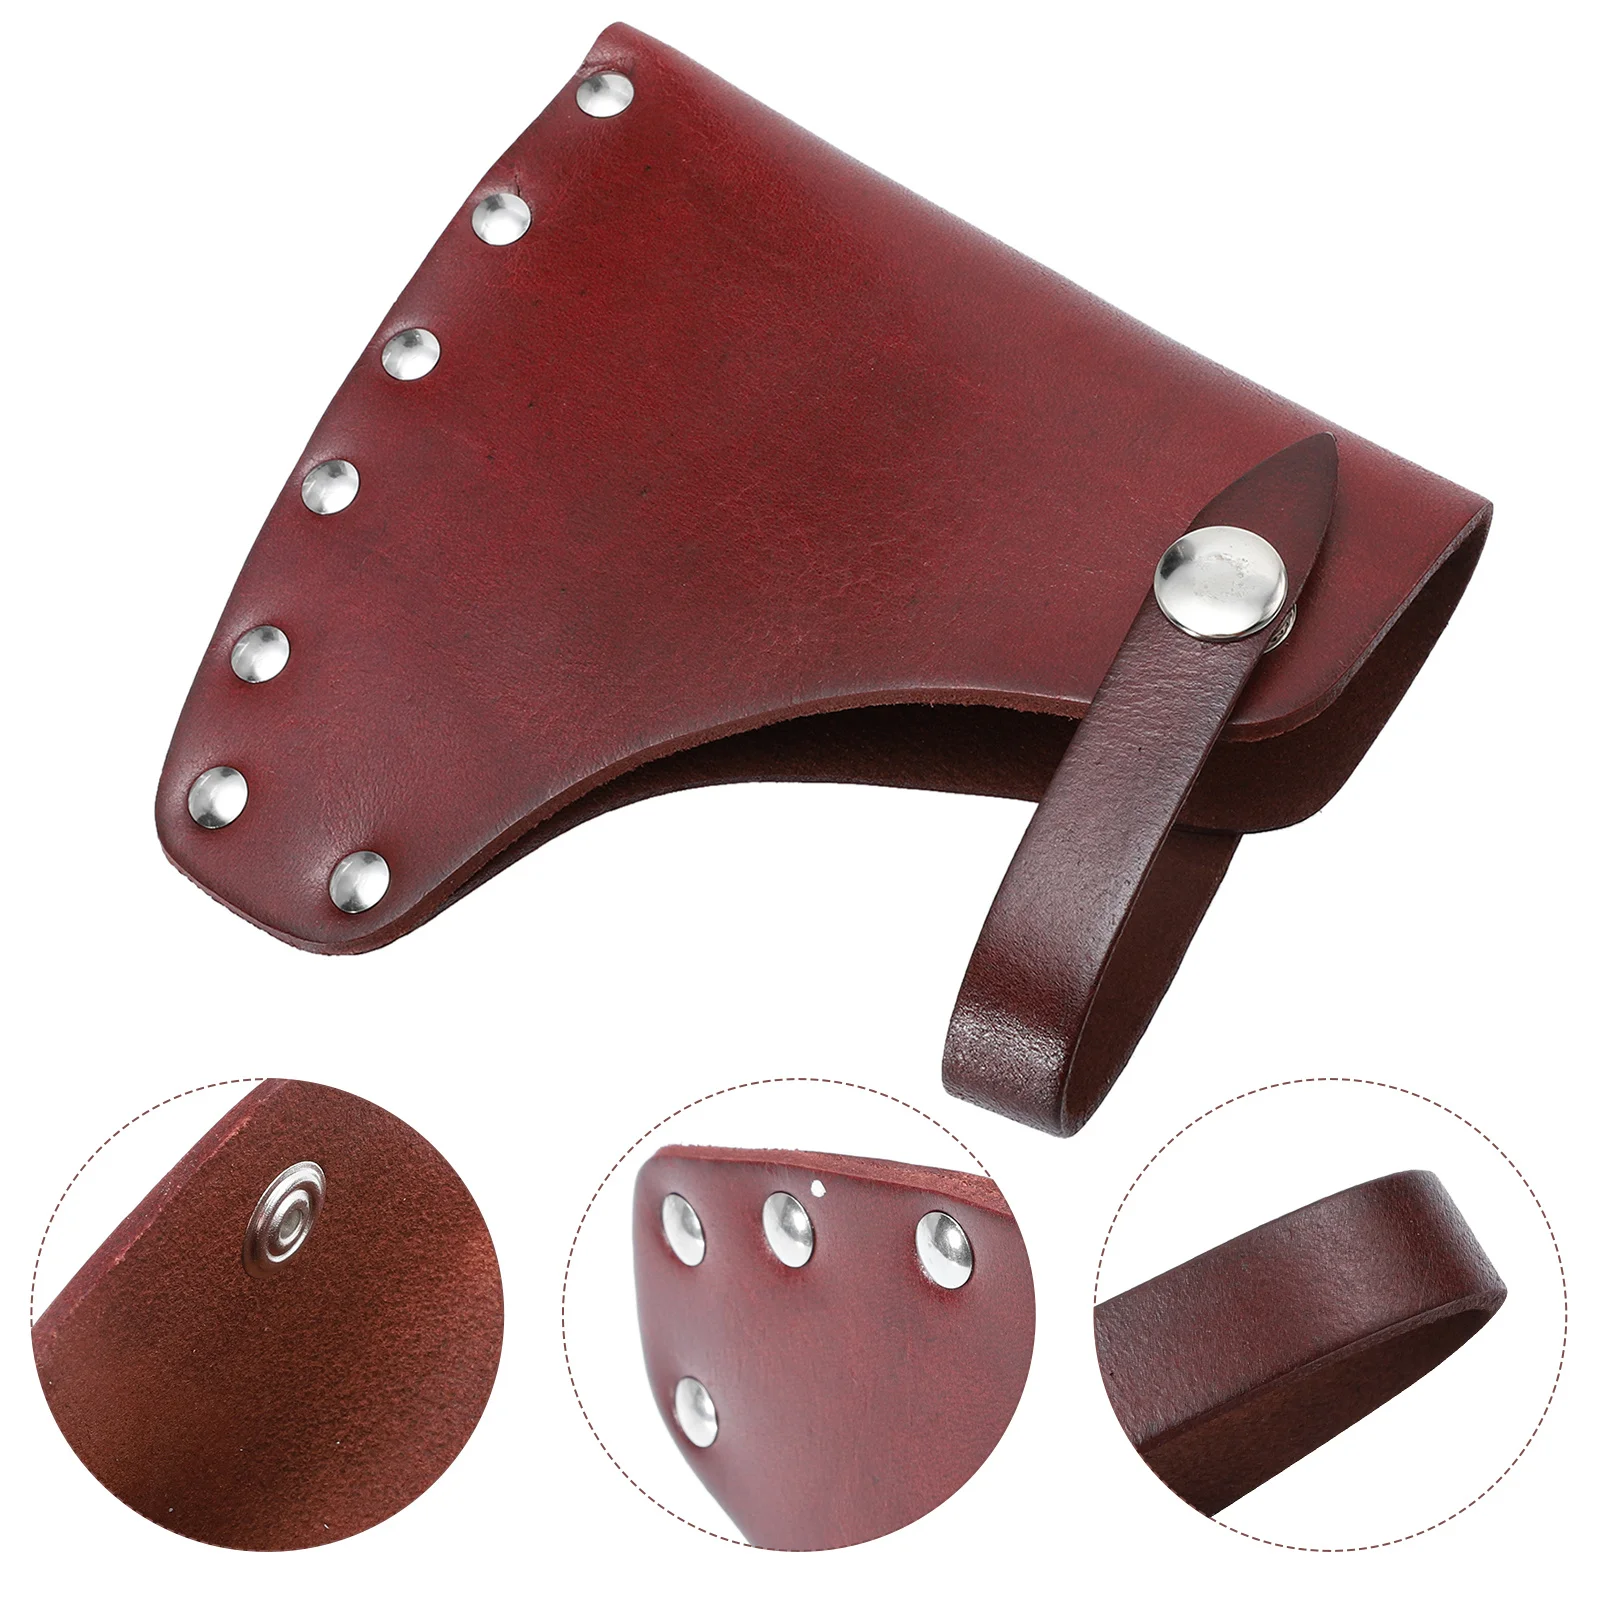 

Cover Sheath Hatchet Belt Protector Sleeve Case Scabbard Holster Head Cowhide Camping Metal Chopping Holder Tool Pouch Hatchets